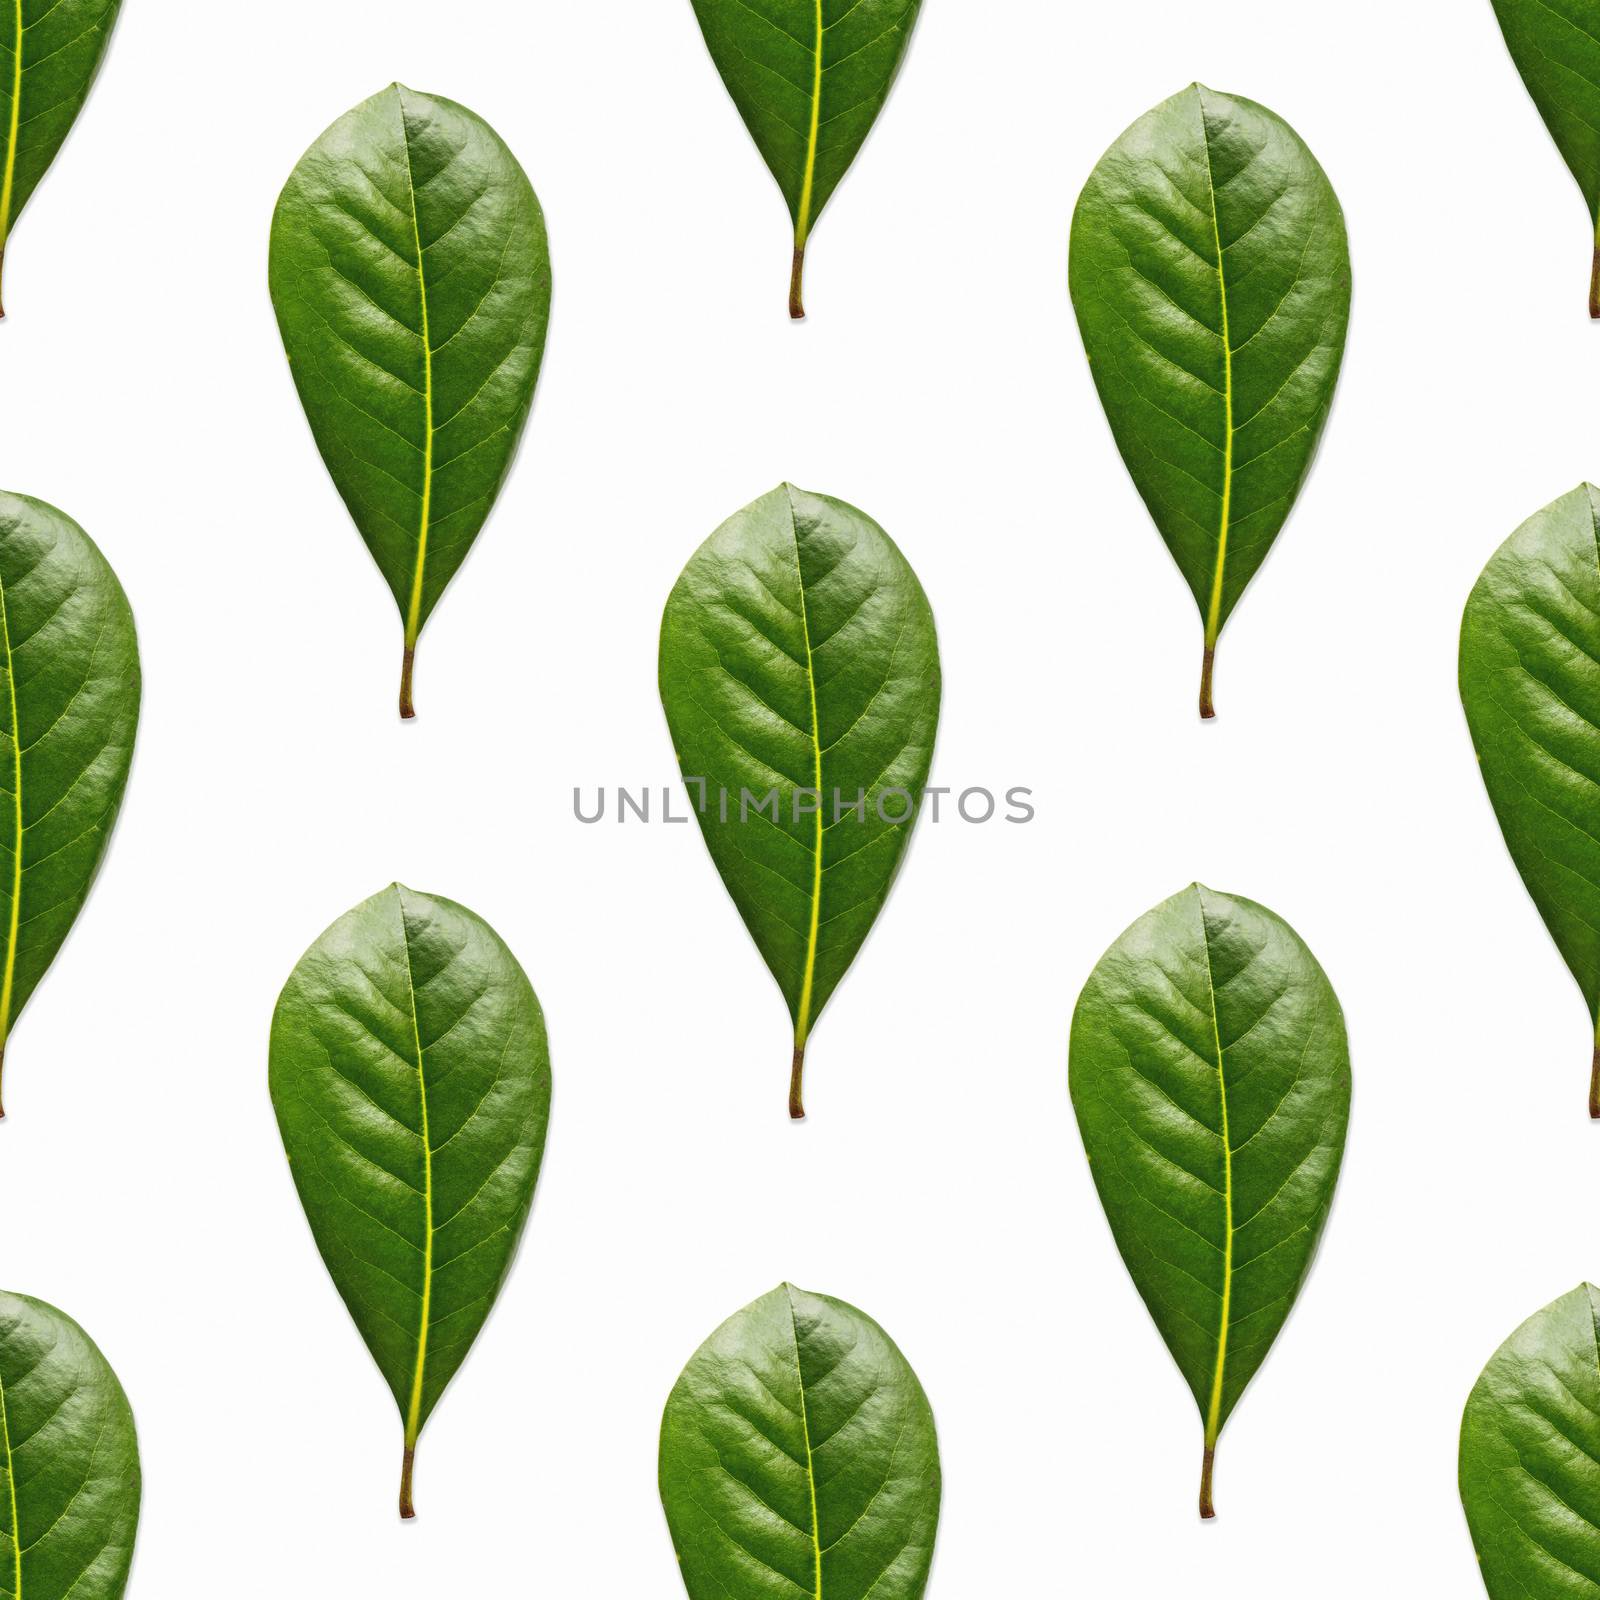 Seamless pattern made of photos of fresh green leaves. Natural background with scattered plants.